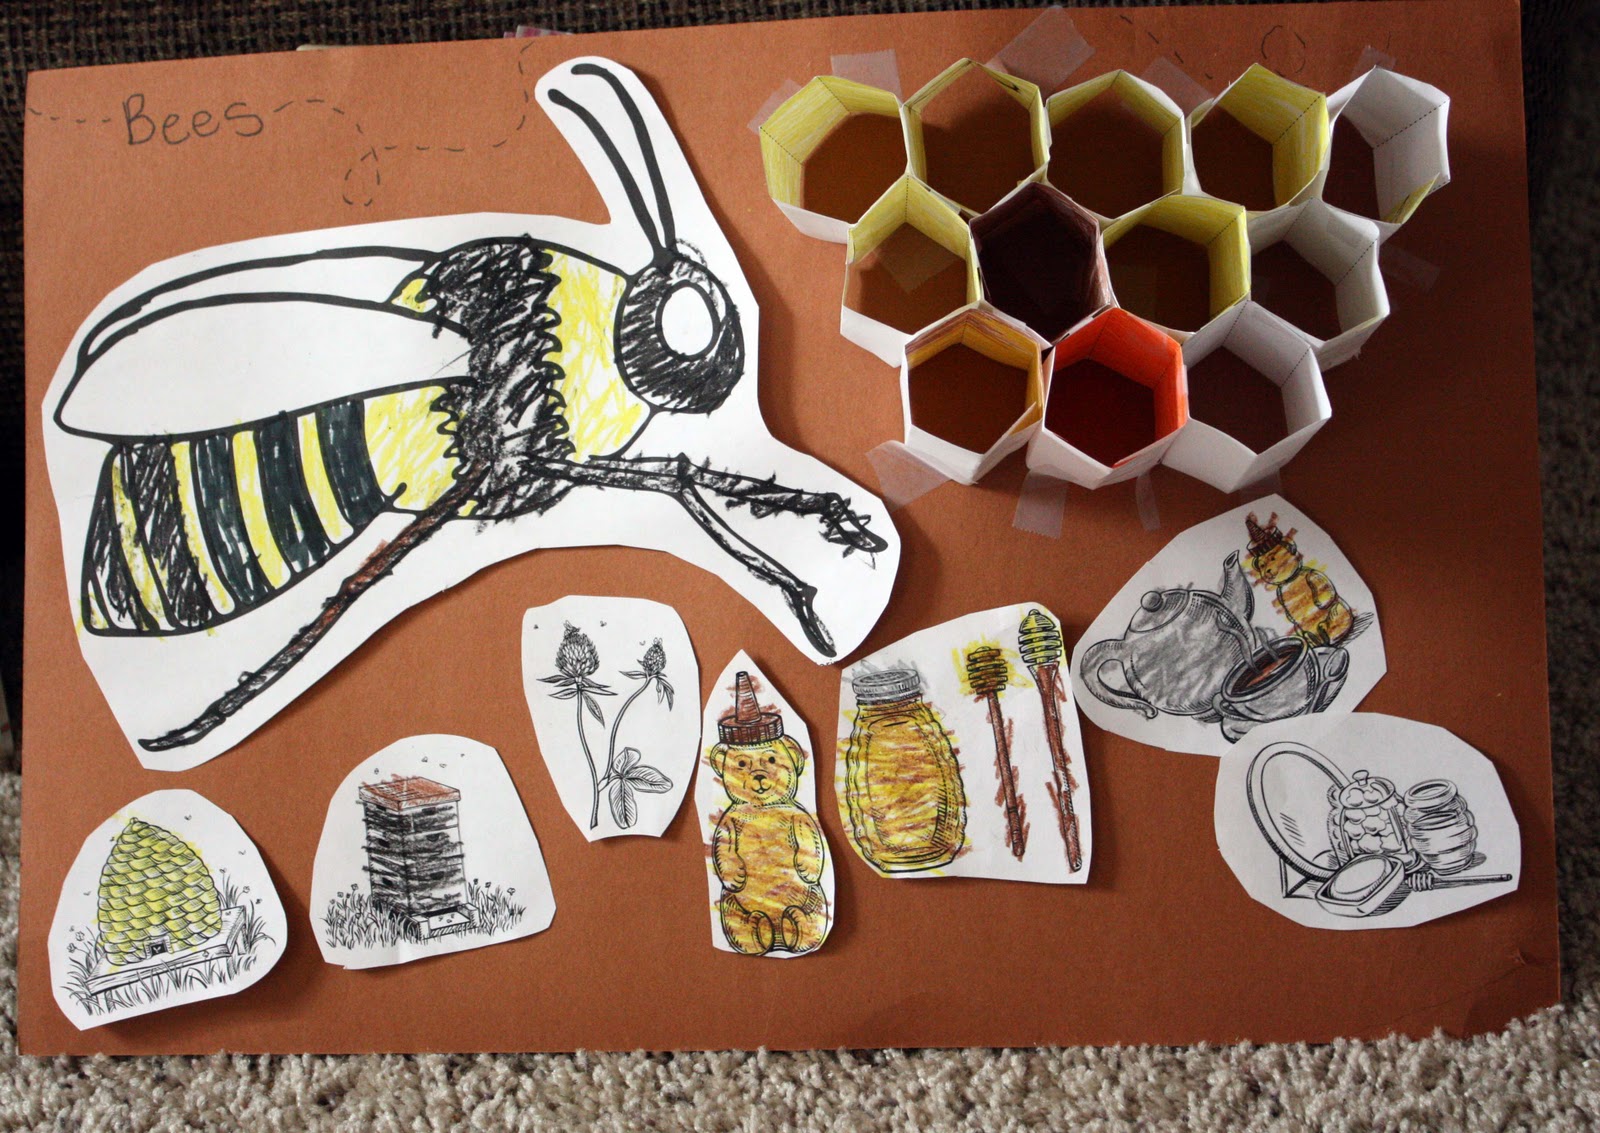 Teaching Kids About Bees They're So Amazing! (she